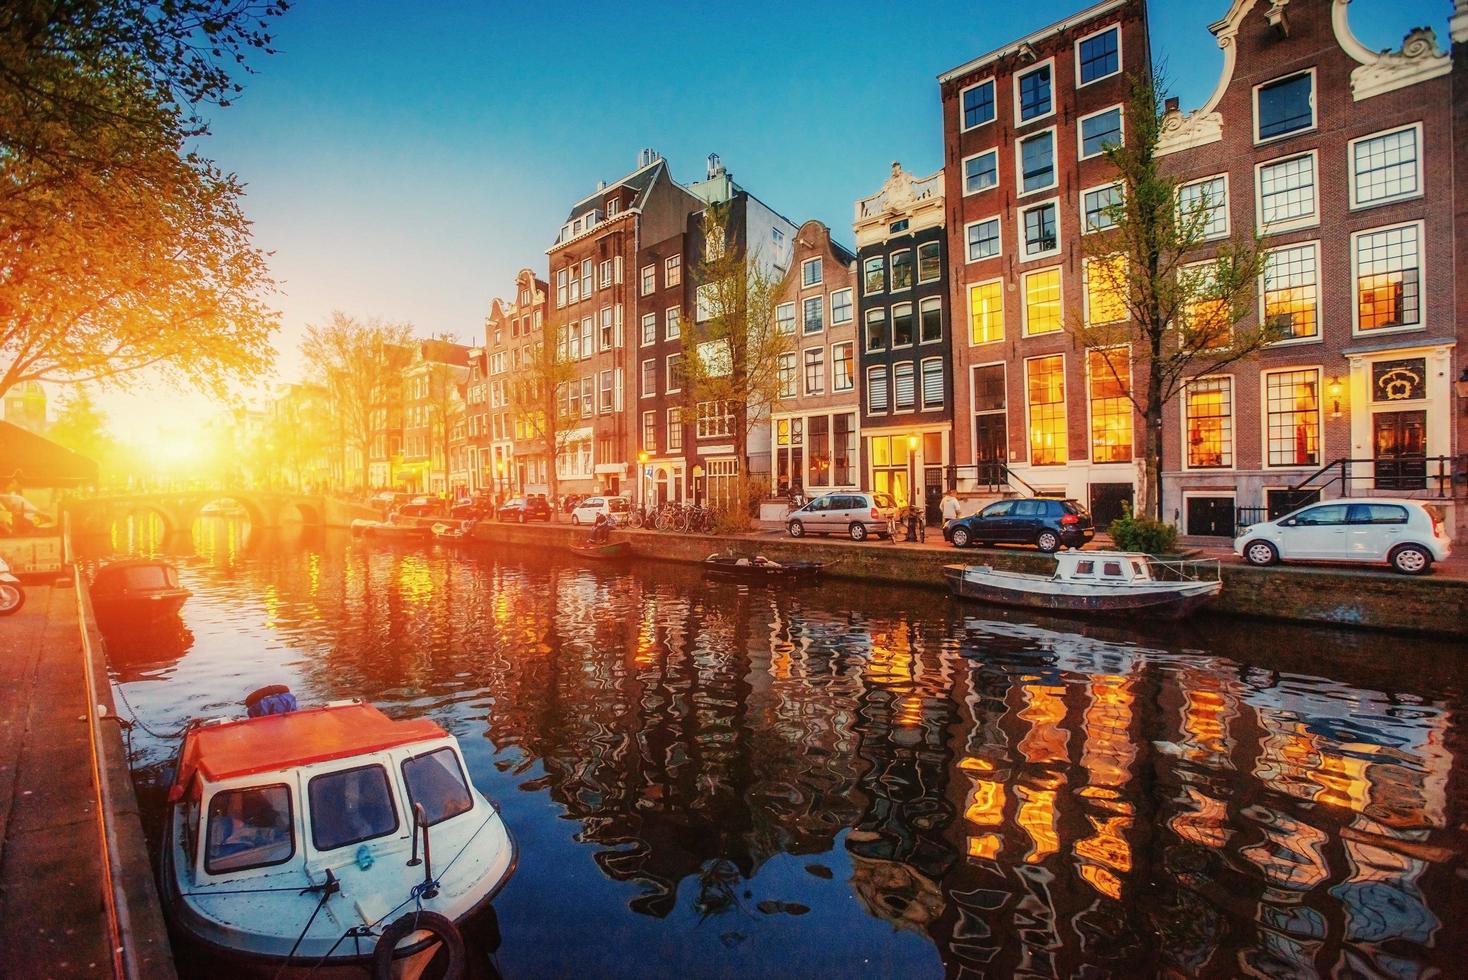 Amsterdam canal. Fantastic sunset is reflected in the water photo